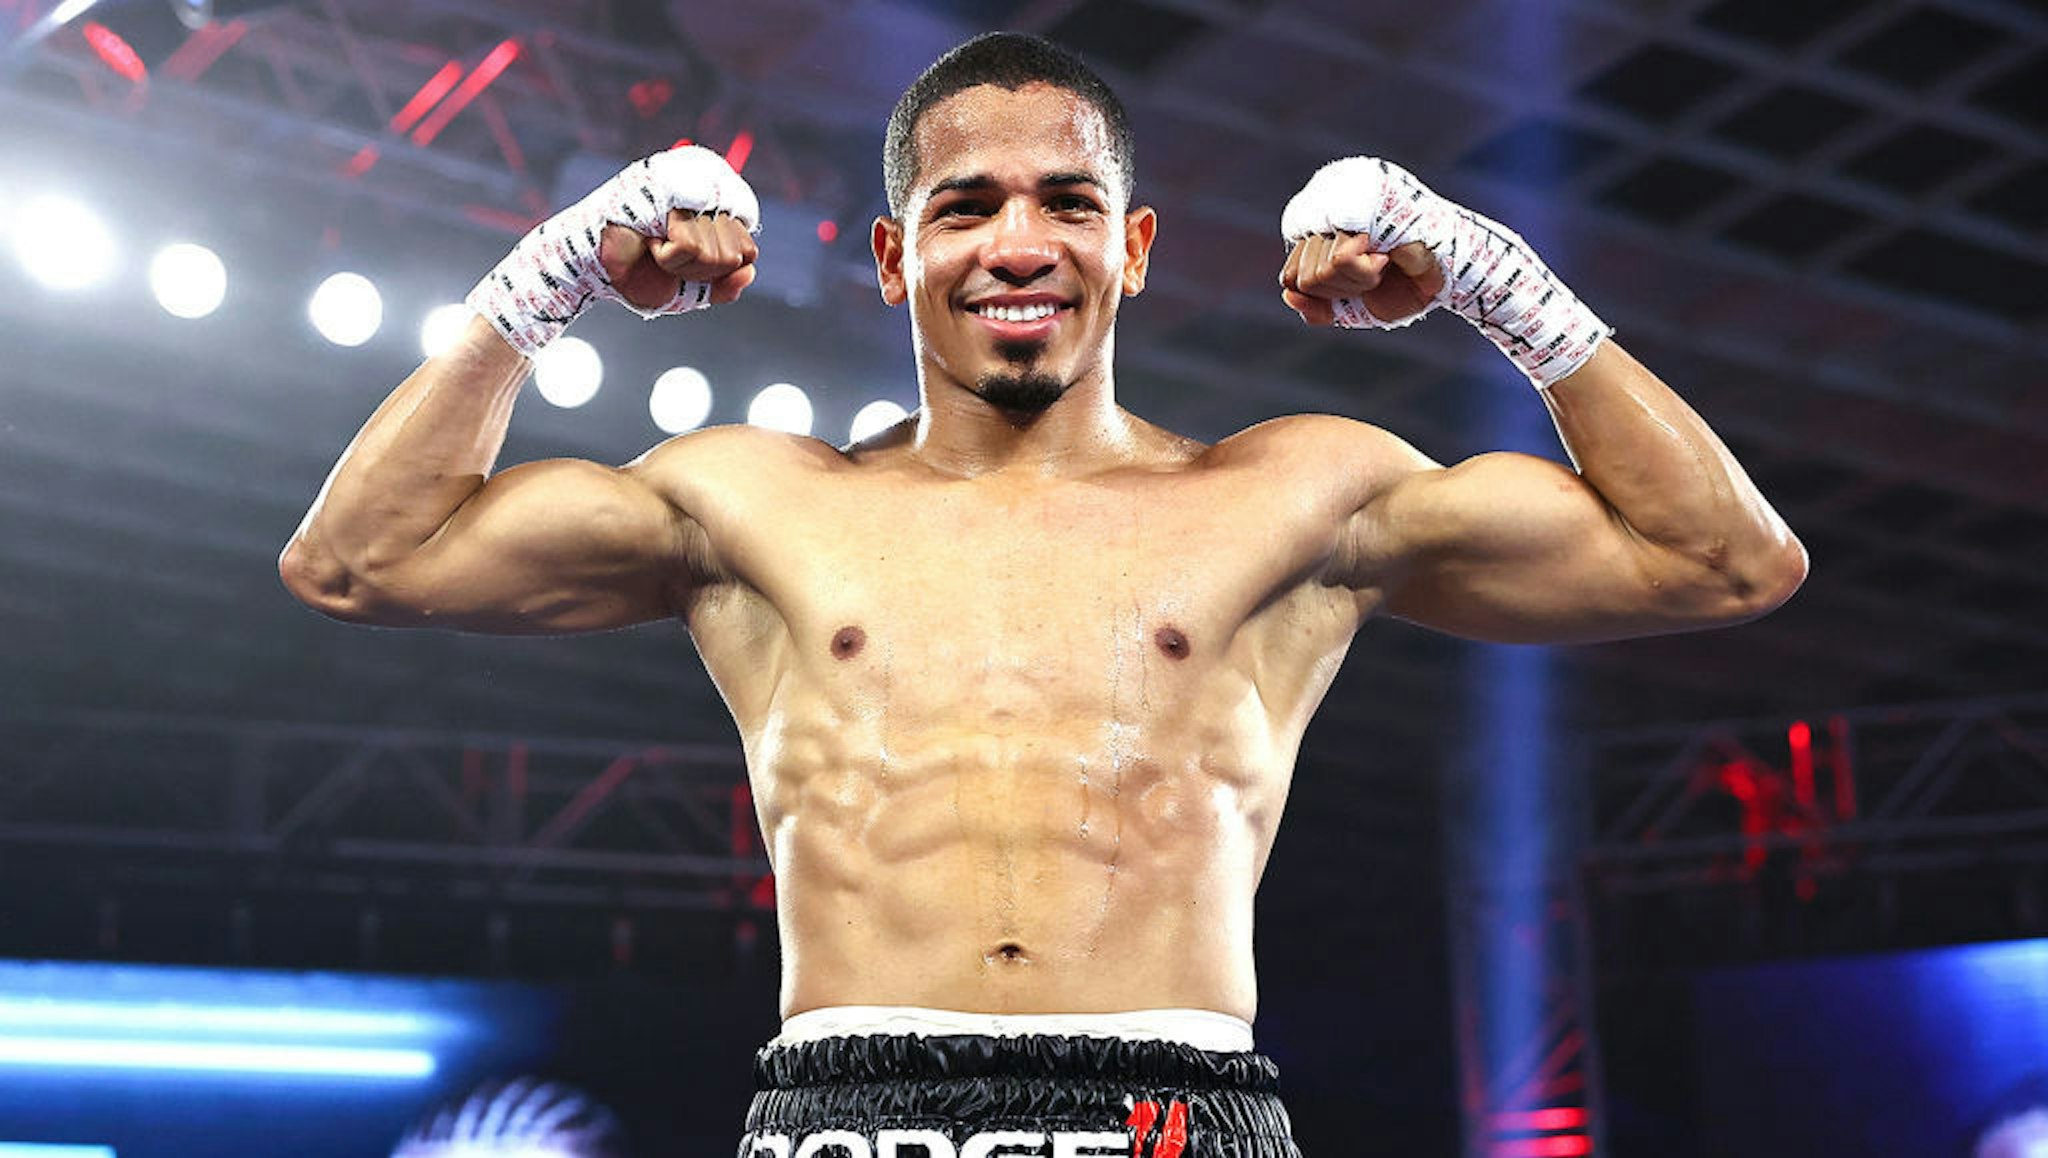 LAS VEGAS, NEVADA - JULY 16: In this handout image provided by Top Rank, Felix Verdejo poses after defeating Will Madera (not pictured) during their lightweight bout at MGM Grand Conference Center Grand Ballroom on July 16, 2020 in Las Vegas, Nevada. (Photo by Mikey Williams/Top Rank via Getty Images)